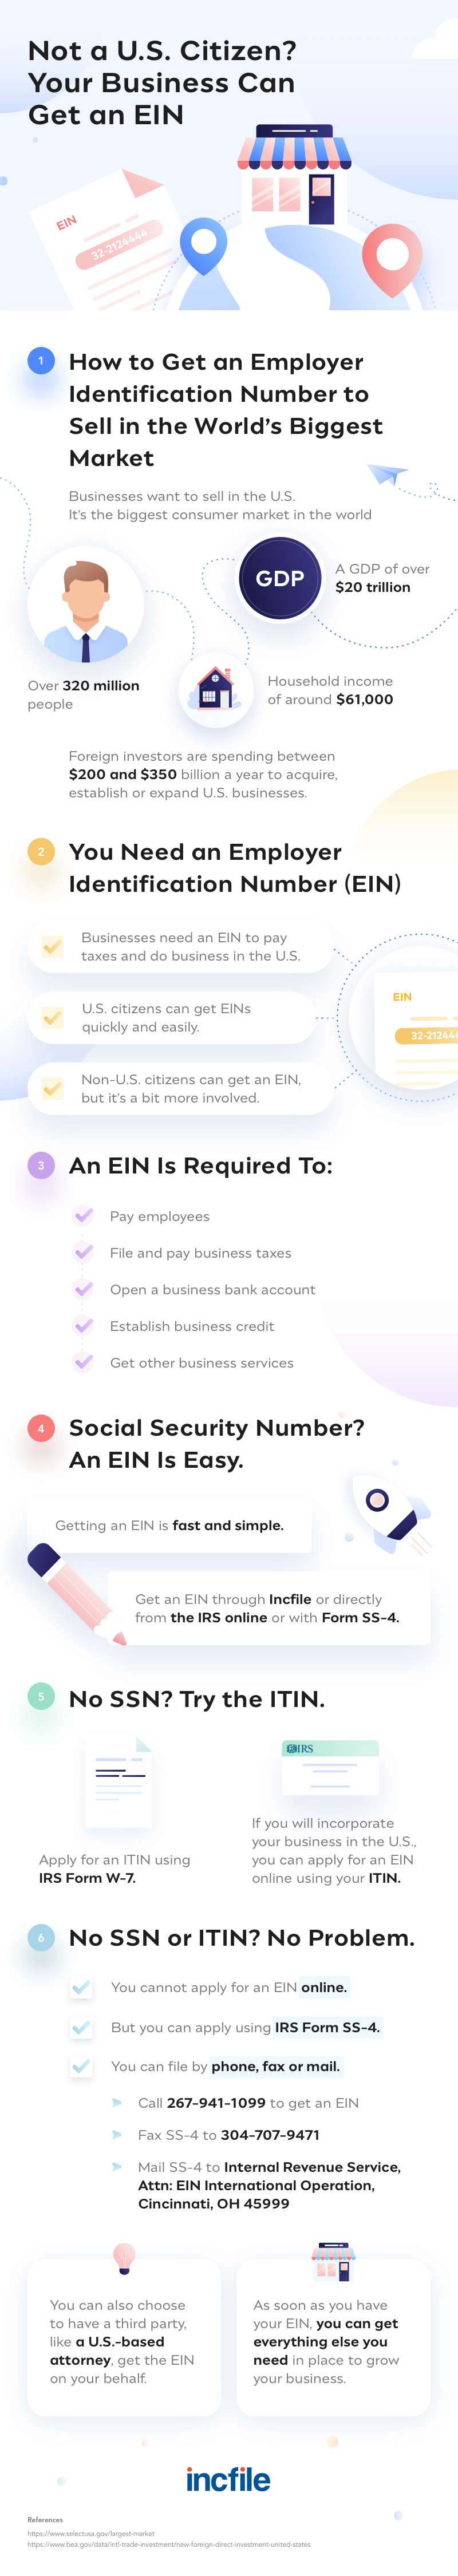 how to get EIN for business if not US citizen